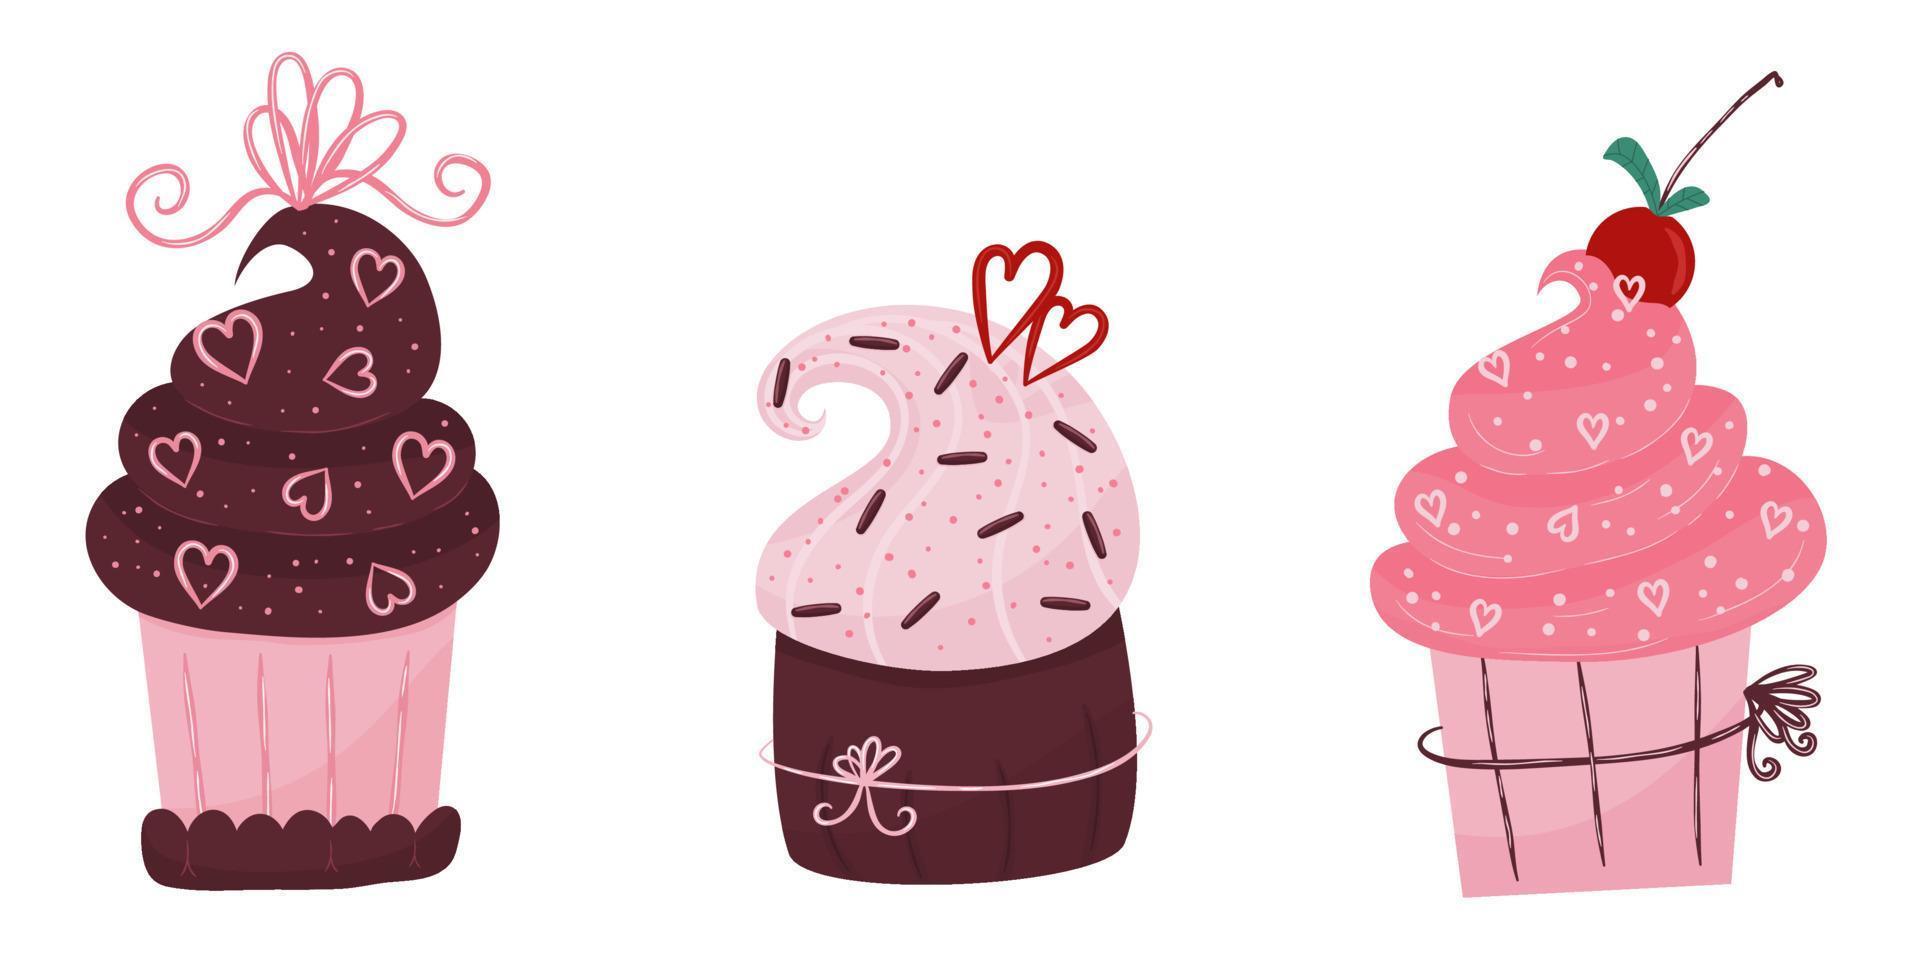 Valentine cake. A set of muffins with chocolate and cherries. A bakery with a heart and a bow for the holiday of valentine's day. Vector illustration in hand drawn flat style.